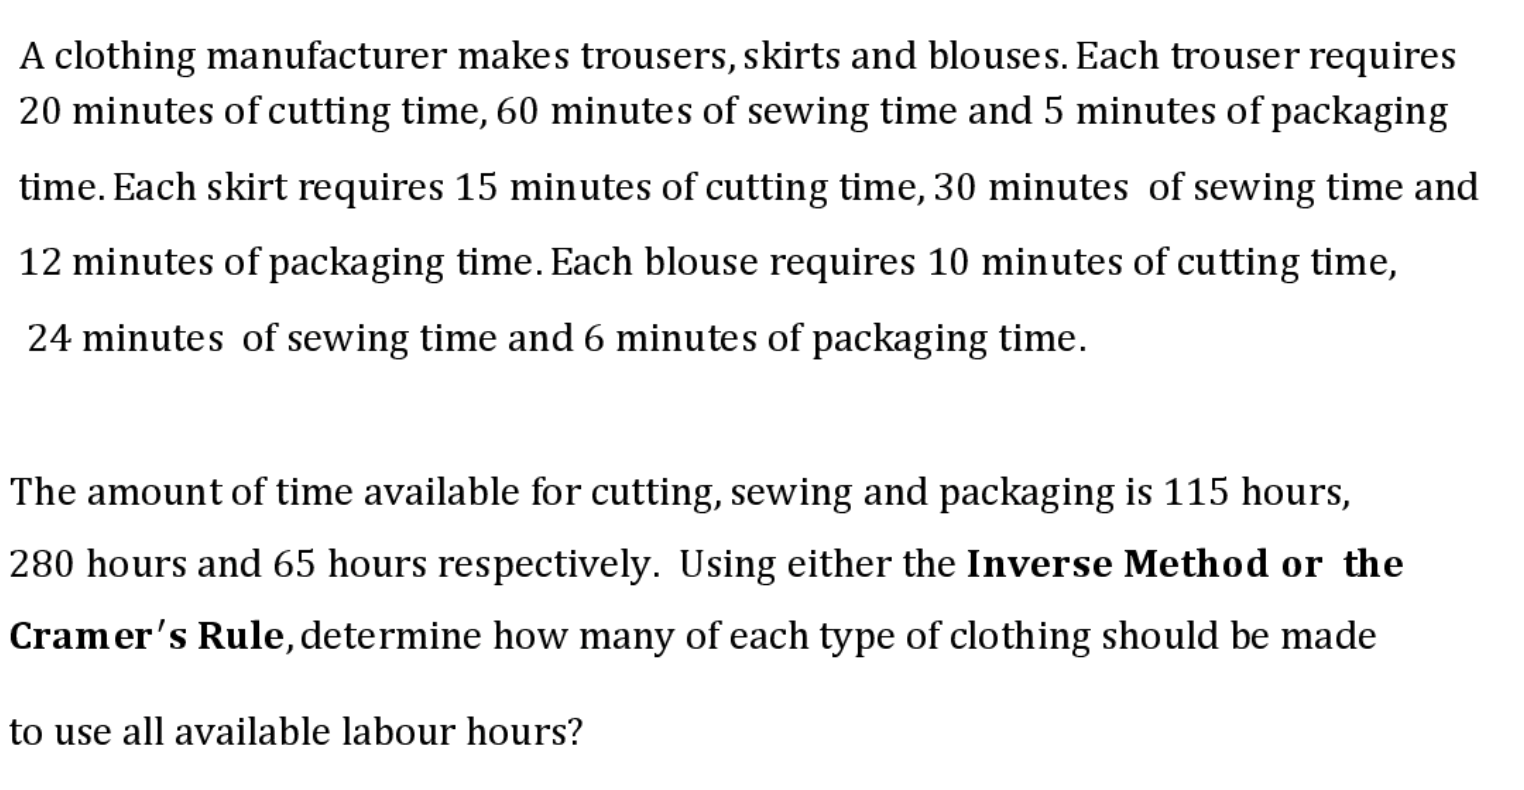 A clothing manufacturer makes trousers, skirts and blouses. Each trouser requires
20 minutes of cutting time, 60 minutes of sewing time and 5 minutes of packaging
time. Each skirt requires 15 minutes of cutting time, 30 minutes of sewing time and
12 minutes of packaging time. Each blouse requires 10 minutes of cutting time,
24 minutes of sewing time and 6 minutes of packaging time.
The amount of time available for cutting, sewing and packaging is 115 hours,
280 hours and 65 hours respectively. Using either the Inverse Method or the
Cramer's Rule, determine how many of each type of clothing should be made
to use all available labour hours?
